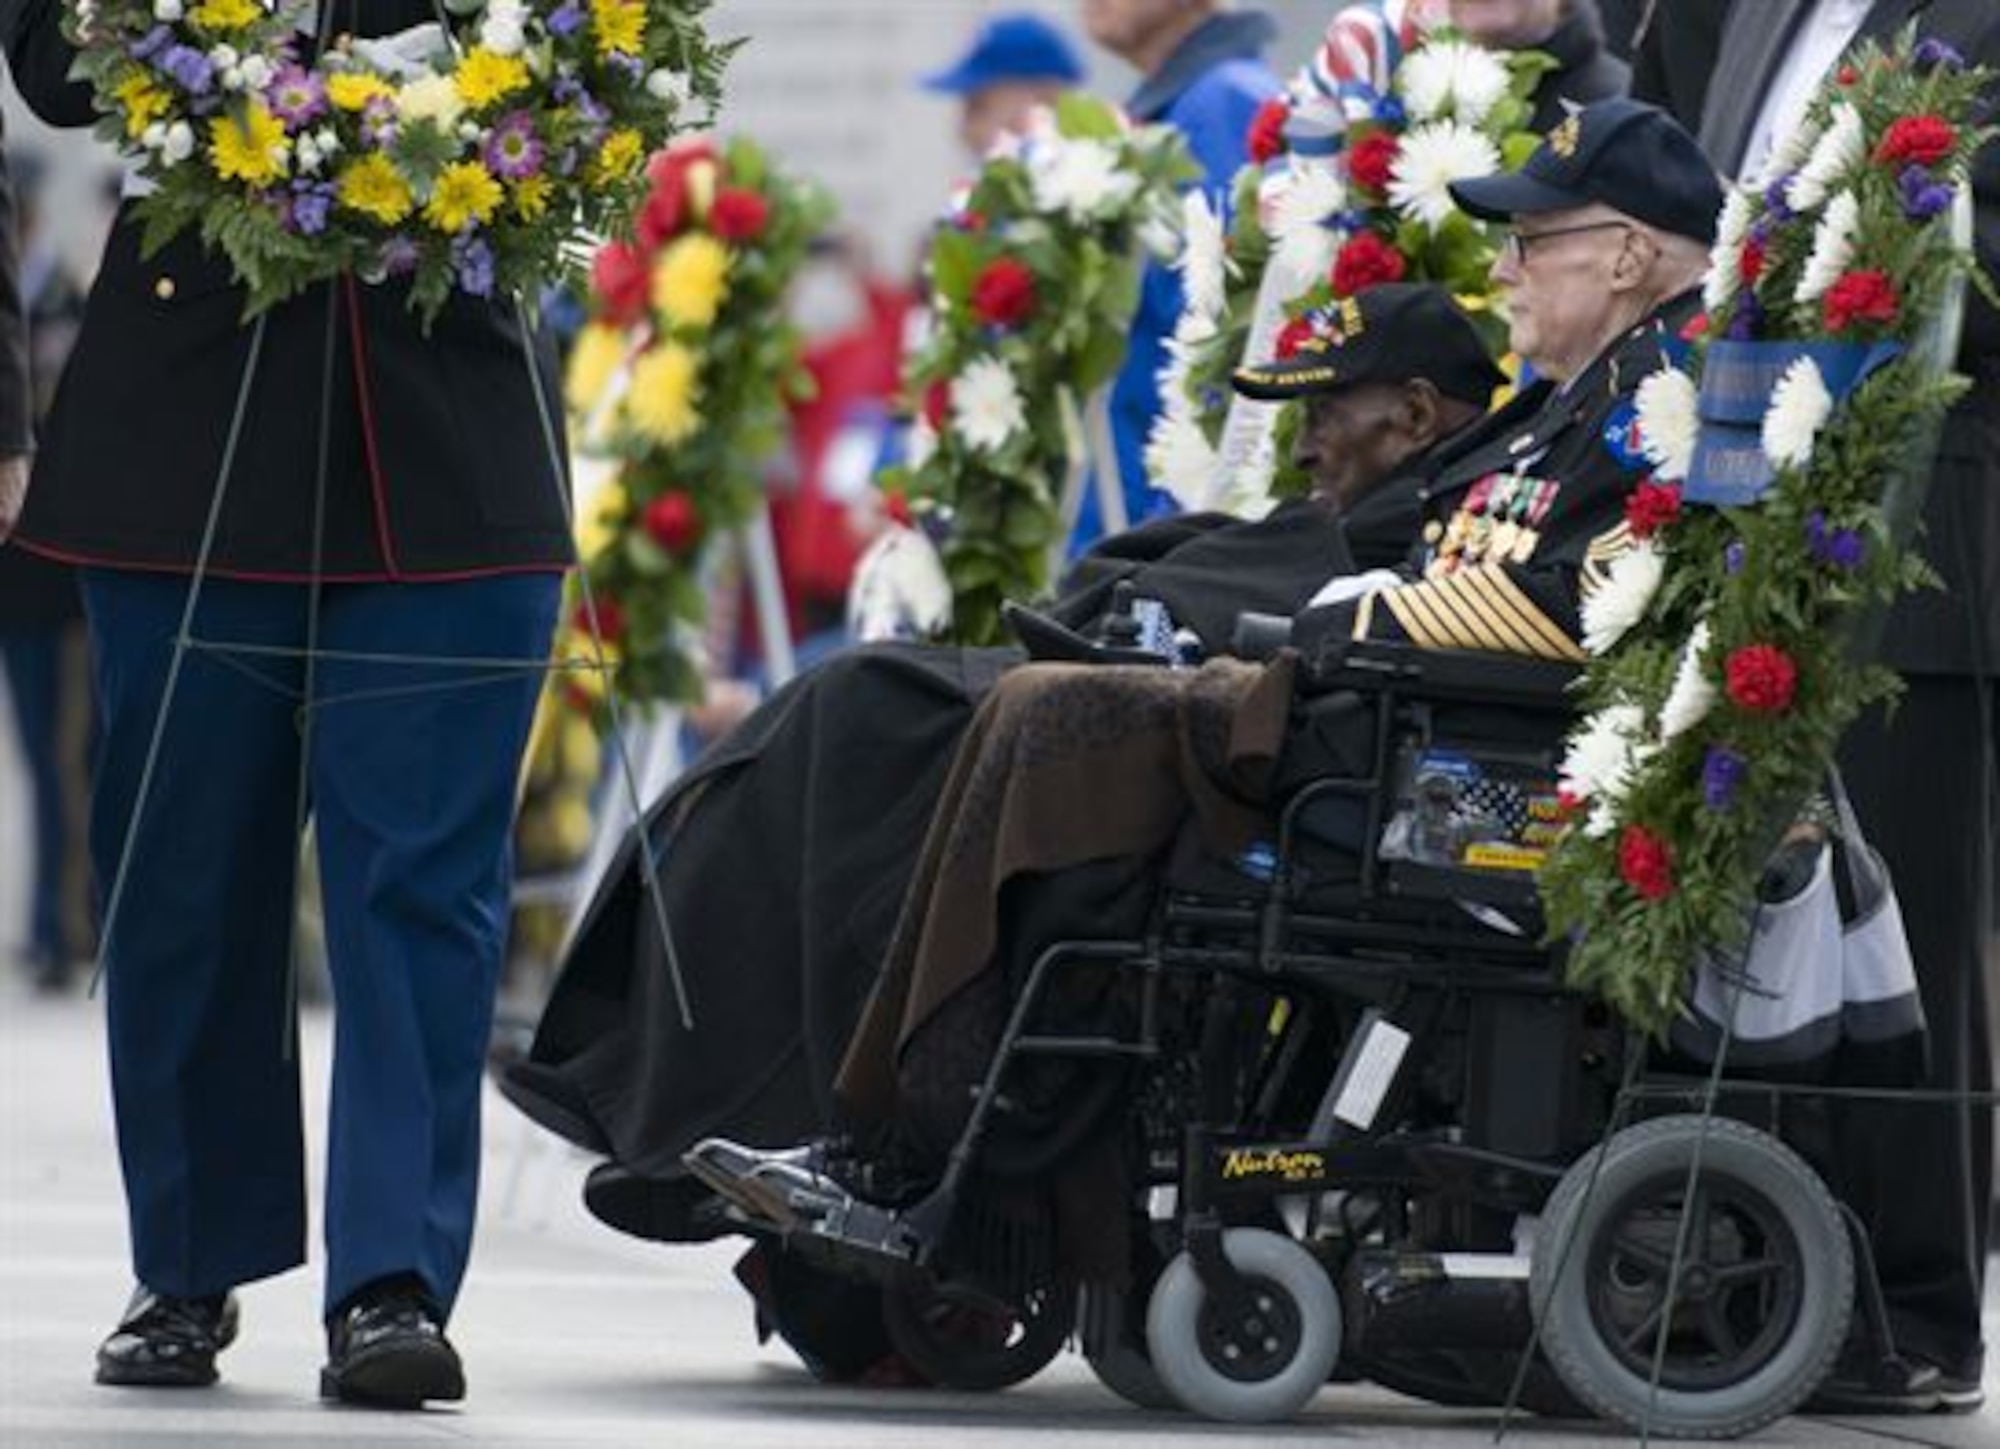 Edward Davis, right, a 94-year-old Army veteran who witnessed the Japanese sneak attack on Hawaii, and Frank Levingston, a 110-year-old Army veteran believed to be the nation’s oldest living World War II veteran, attend a Pearl Harbor remembrance ceremony at the National World War II Memorial on Dec. 7, 2015, in Washington, D.C. (U.S. Air Force photo/Sean Kimmons)